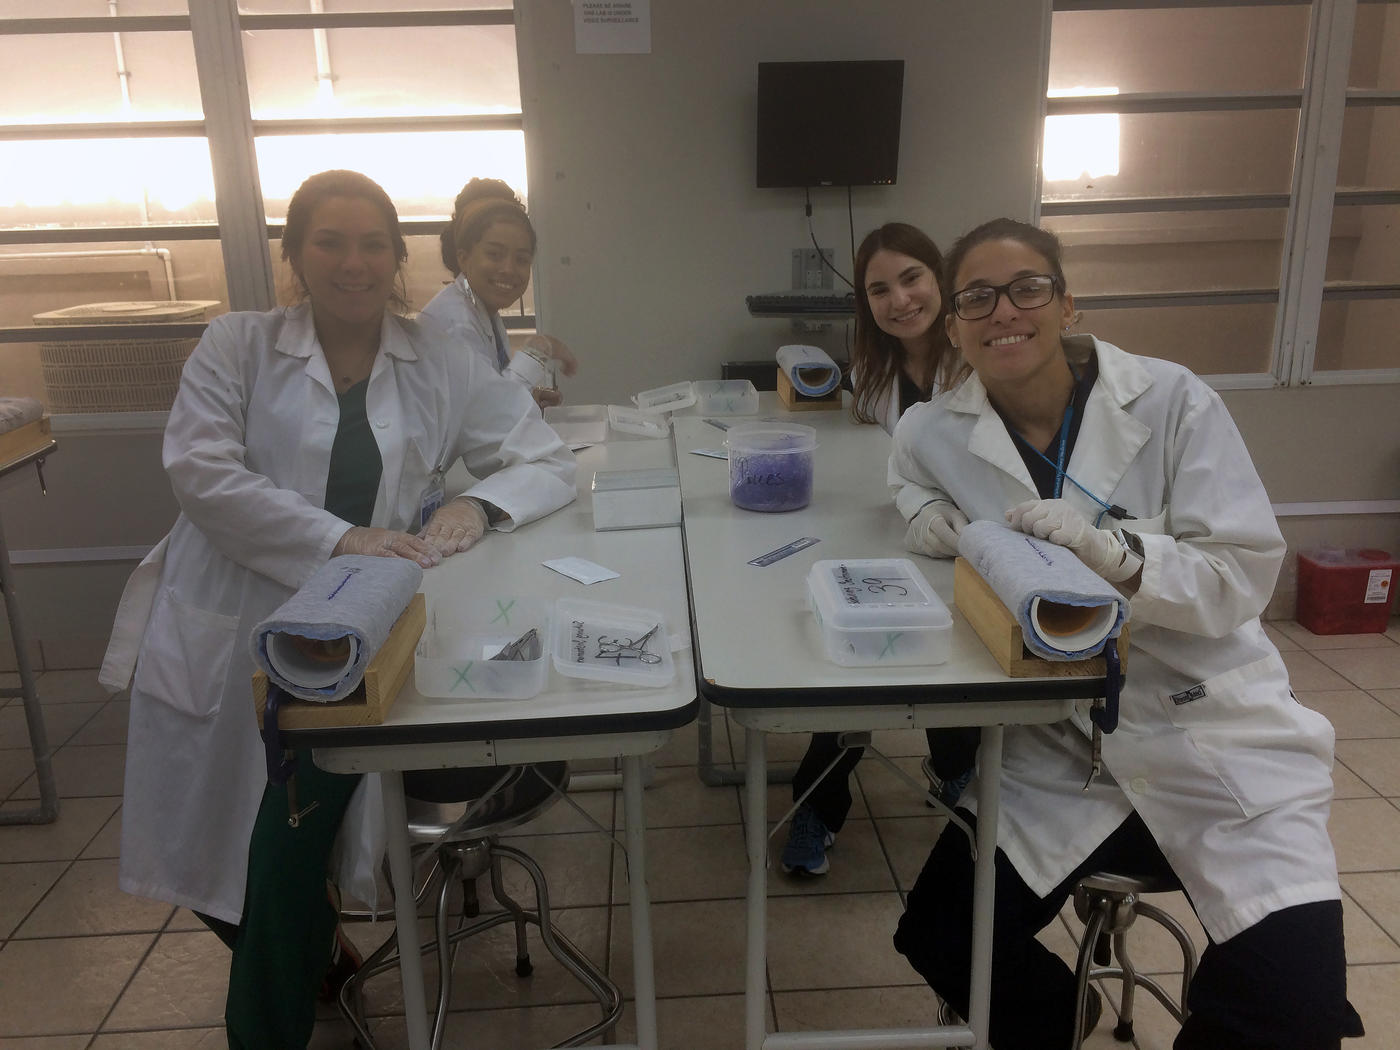 Students in lab coats working at a table